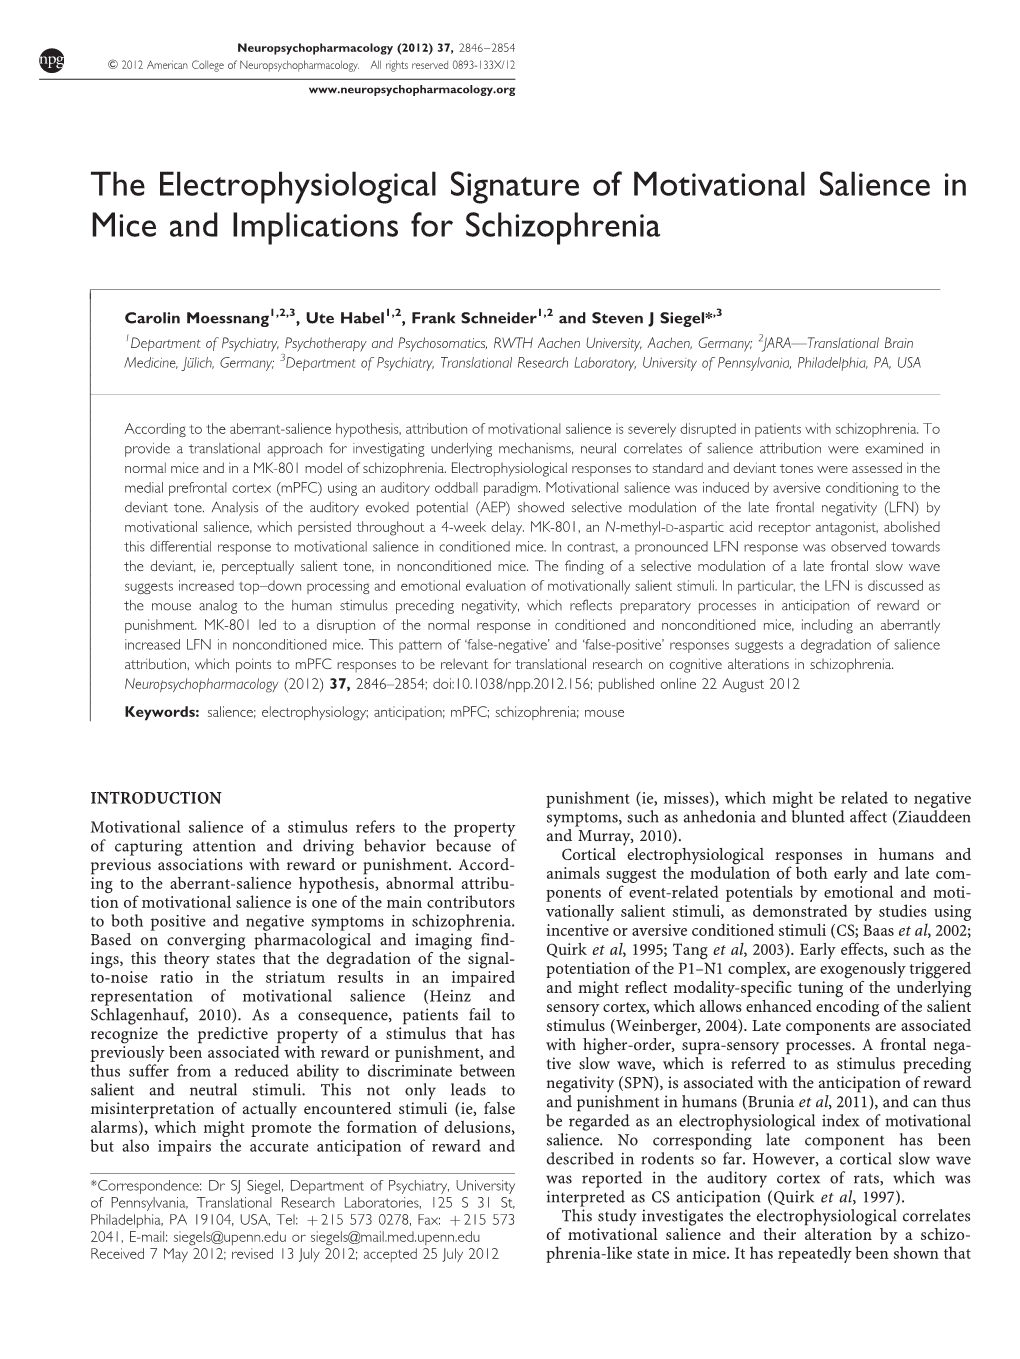 The Electrophysiological Signature of Motivational Salience in Mice and Implications for Schizophrenia